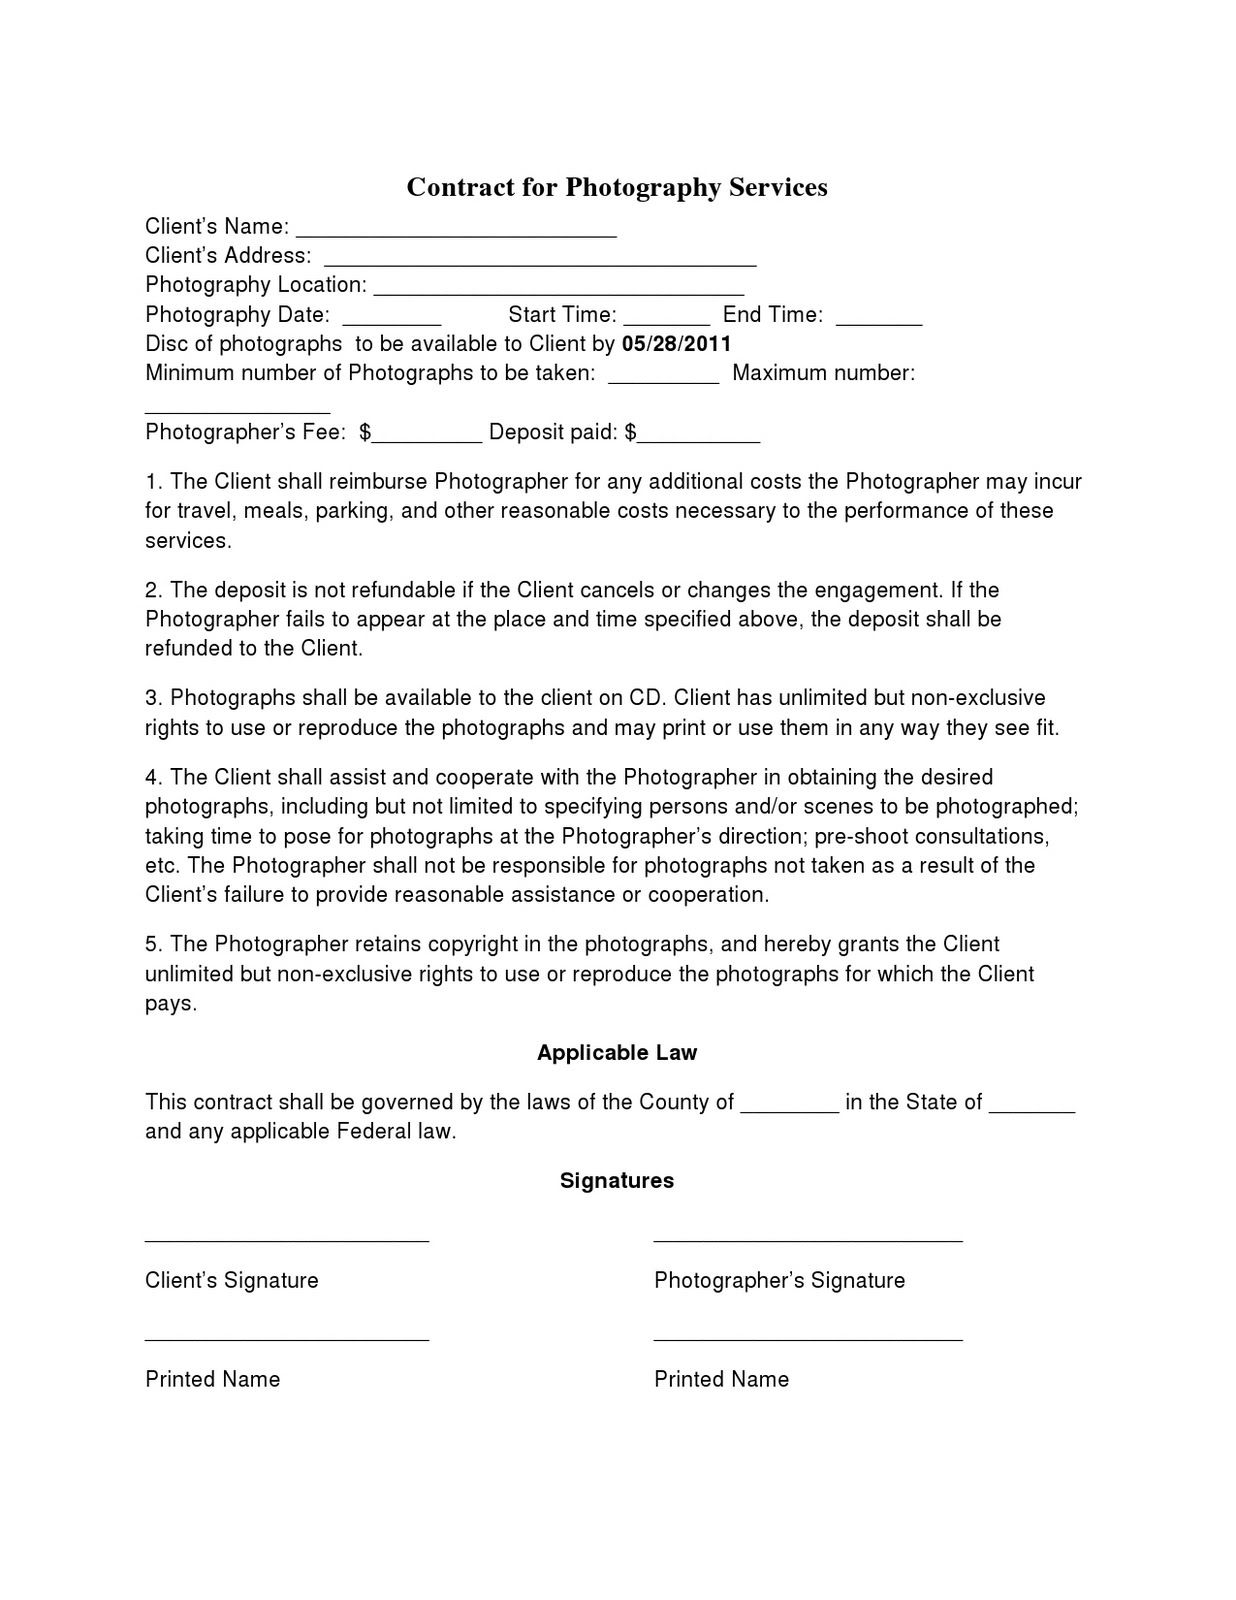 Non Compete Agreement Photography Contract Template Wedding Photography Contract Template Photography Contract Wedding Photography Contract